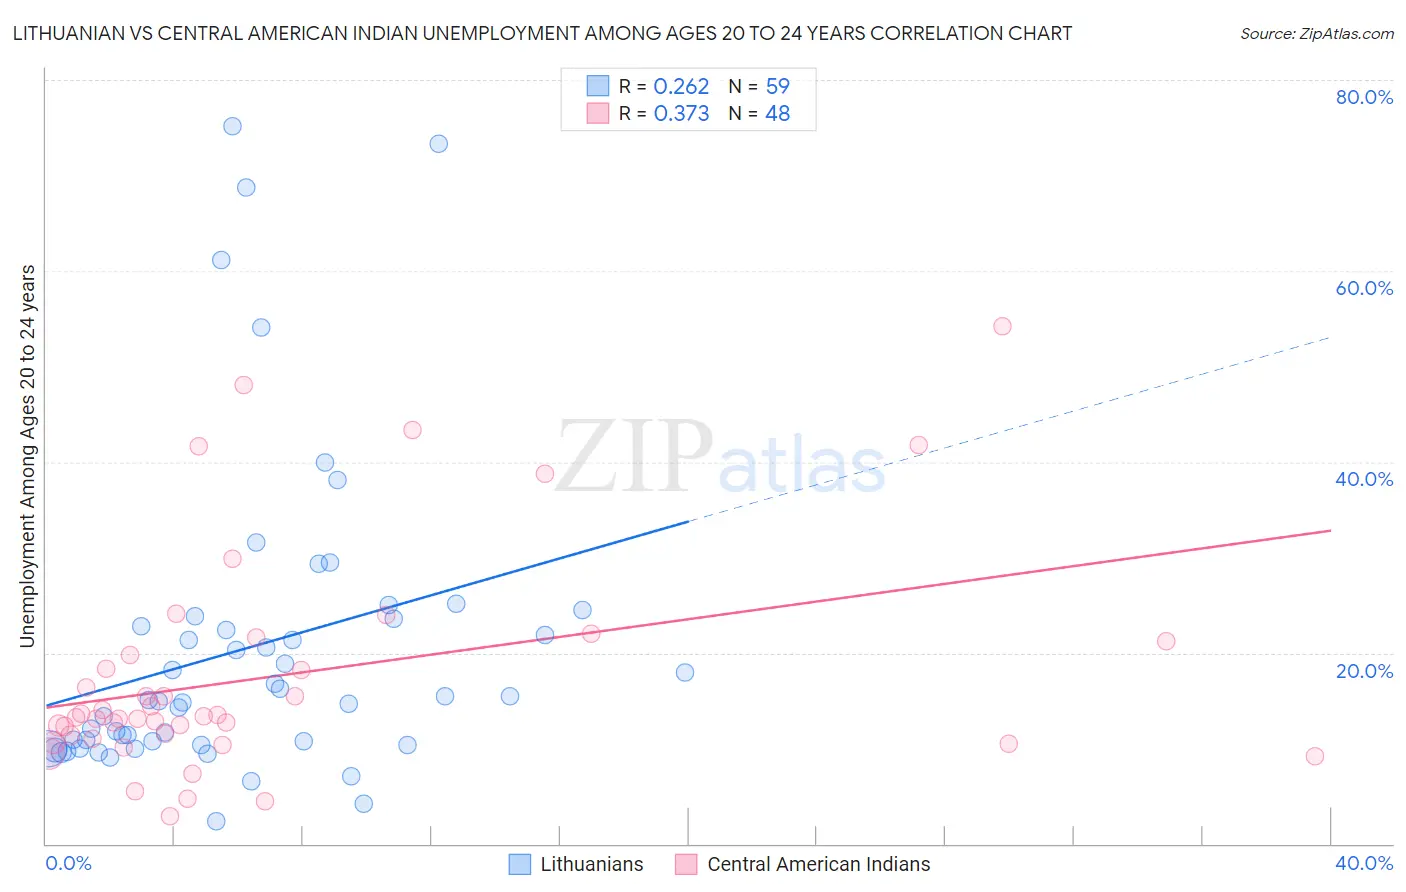 Lithuanian vs Central American Indian Unemployment Among Ages 20 to 24 years